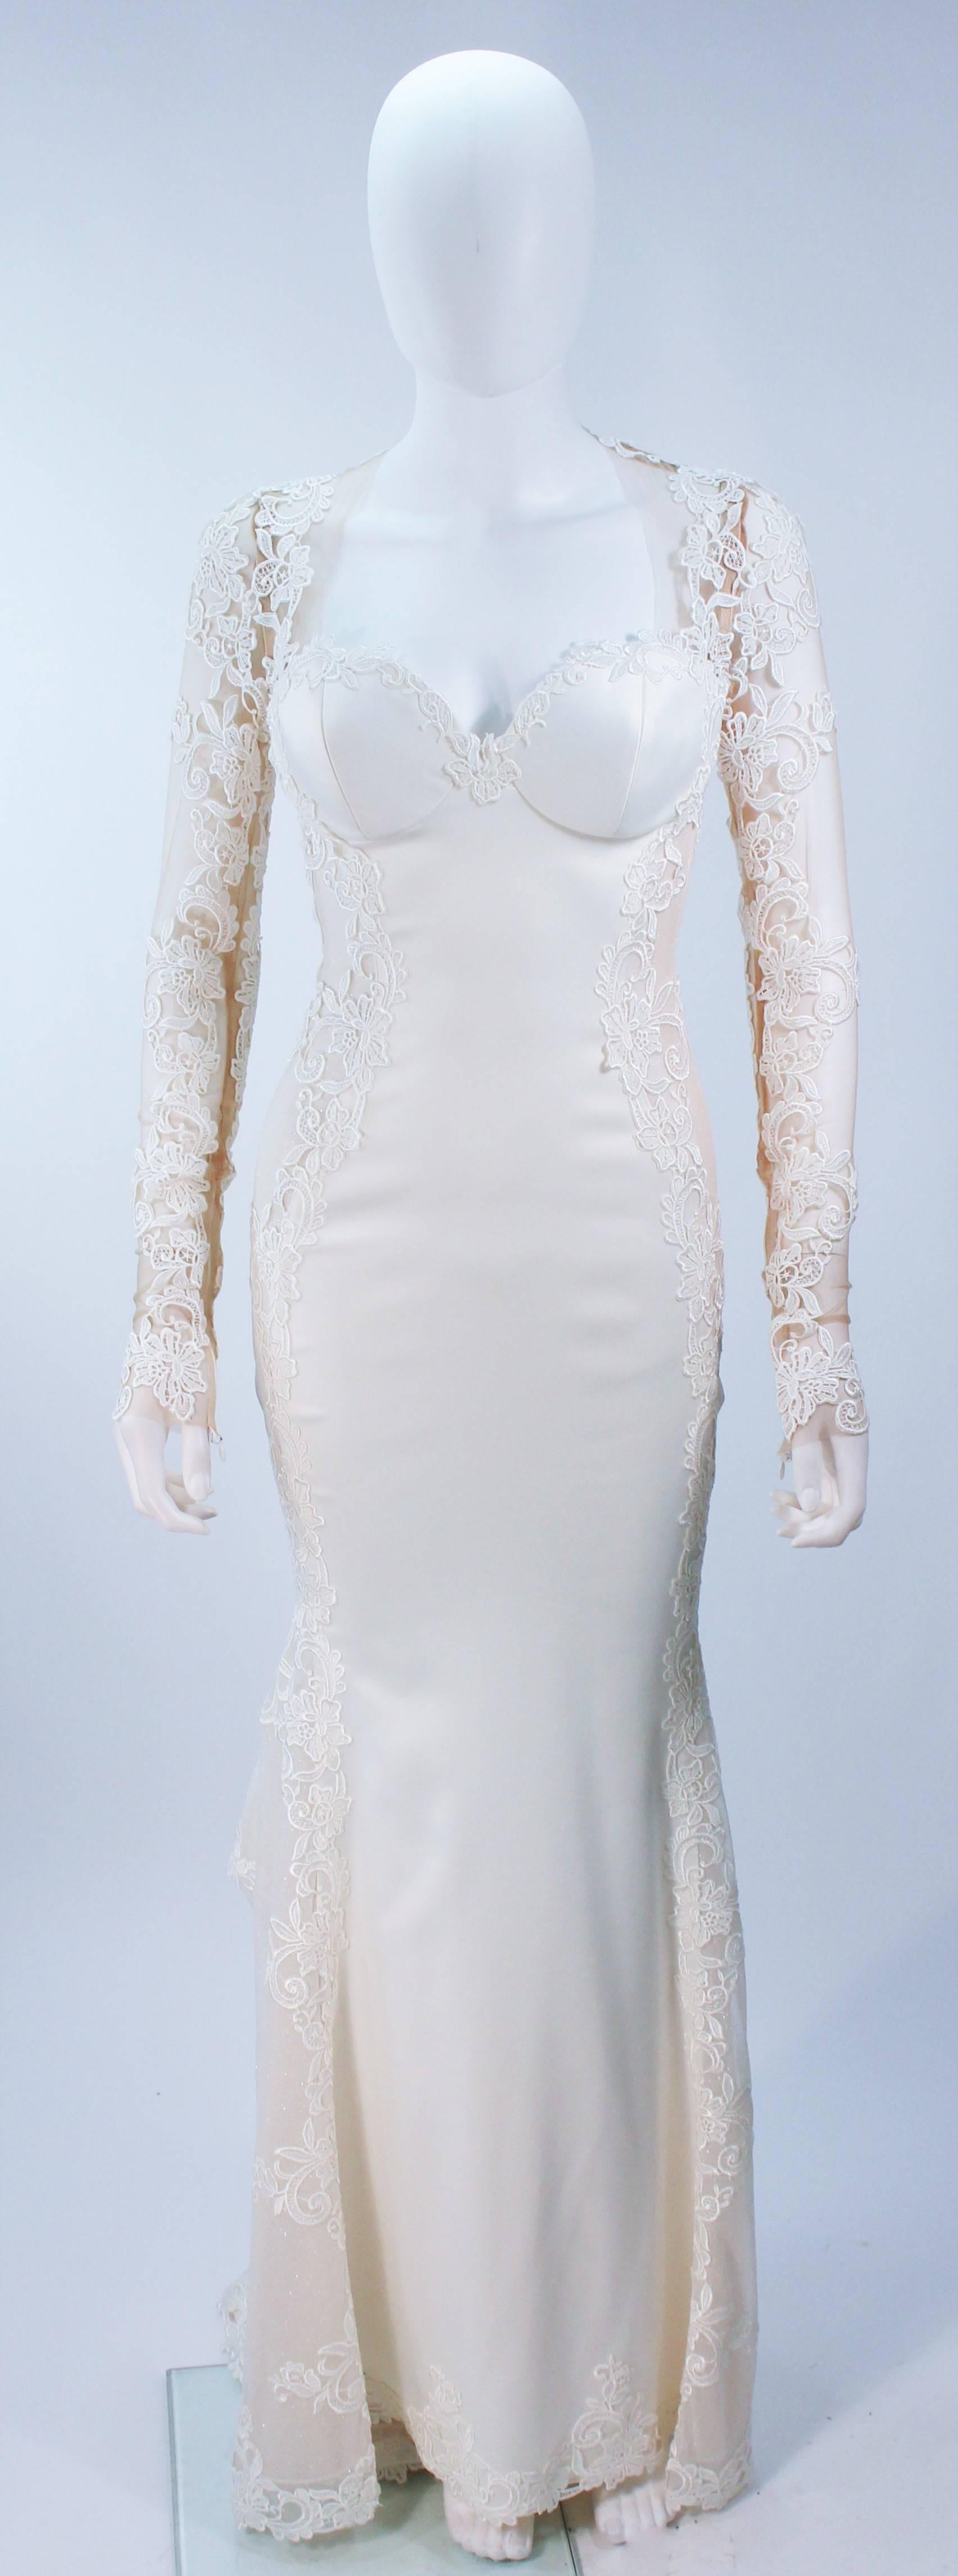 Purple GALIA LAHAV Couture White Floral Lace Gown with Train and Sheer Details Size 2